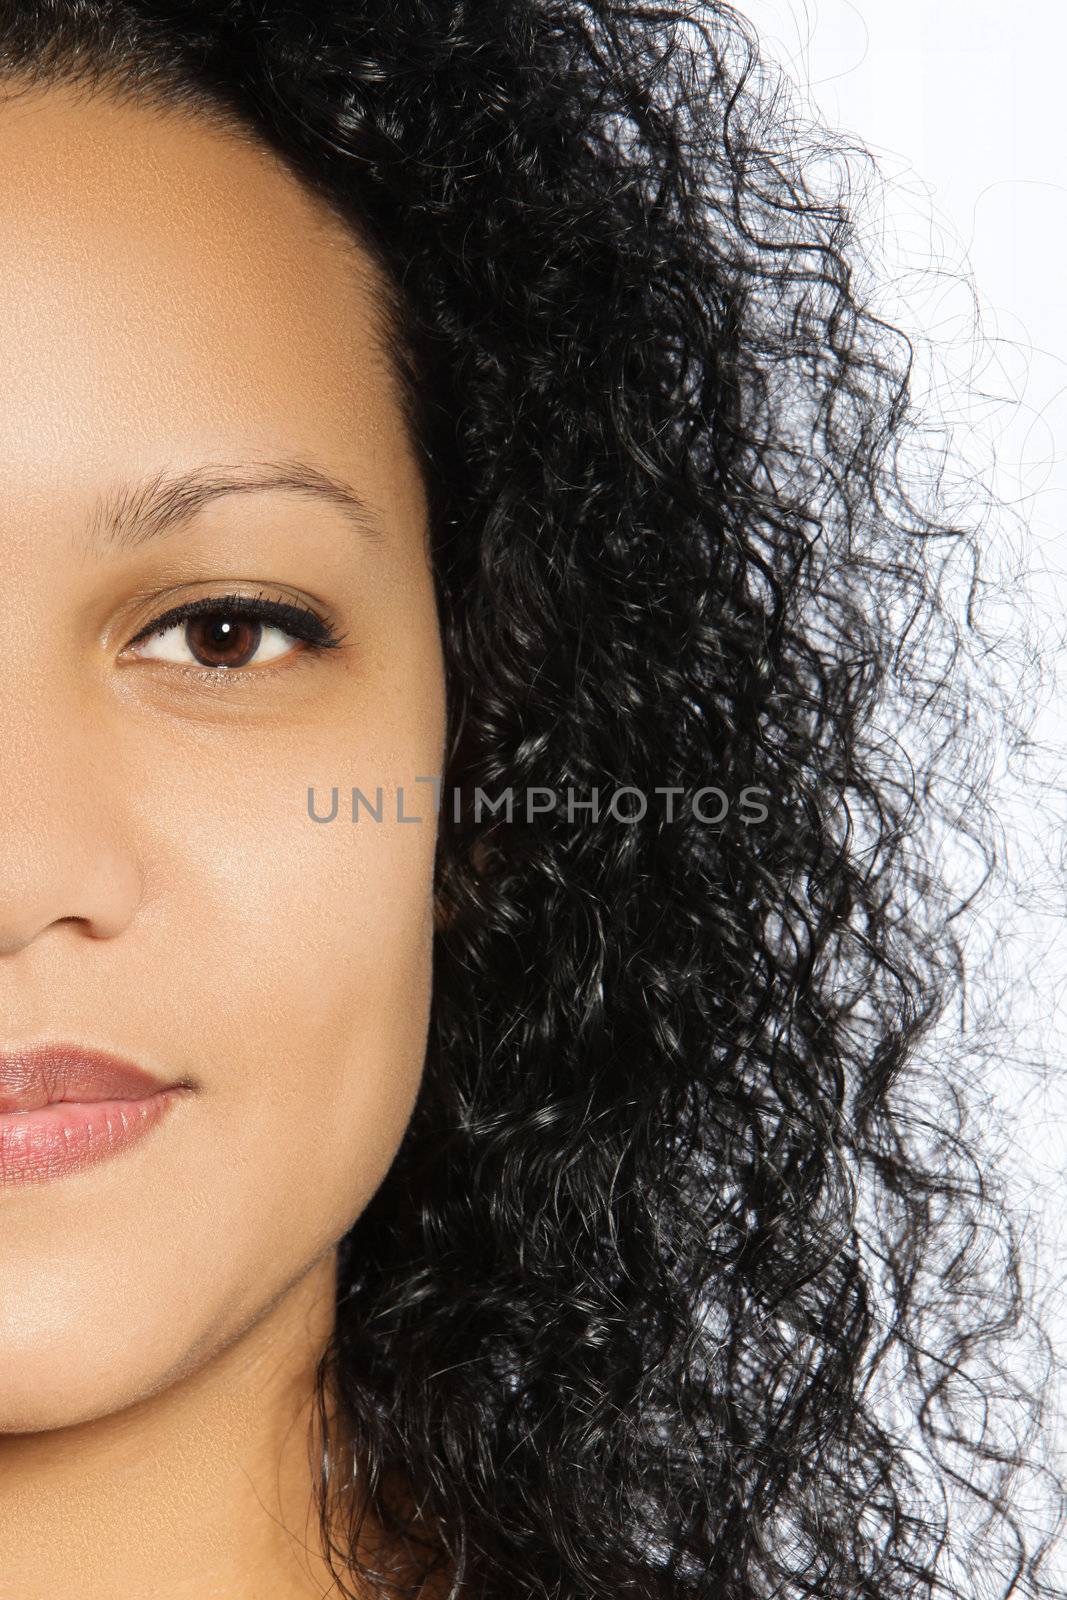 Half faced portrait of a beautiful girl with balck curly hair